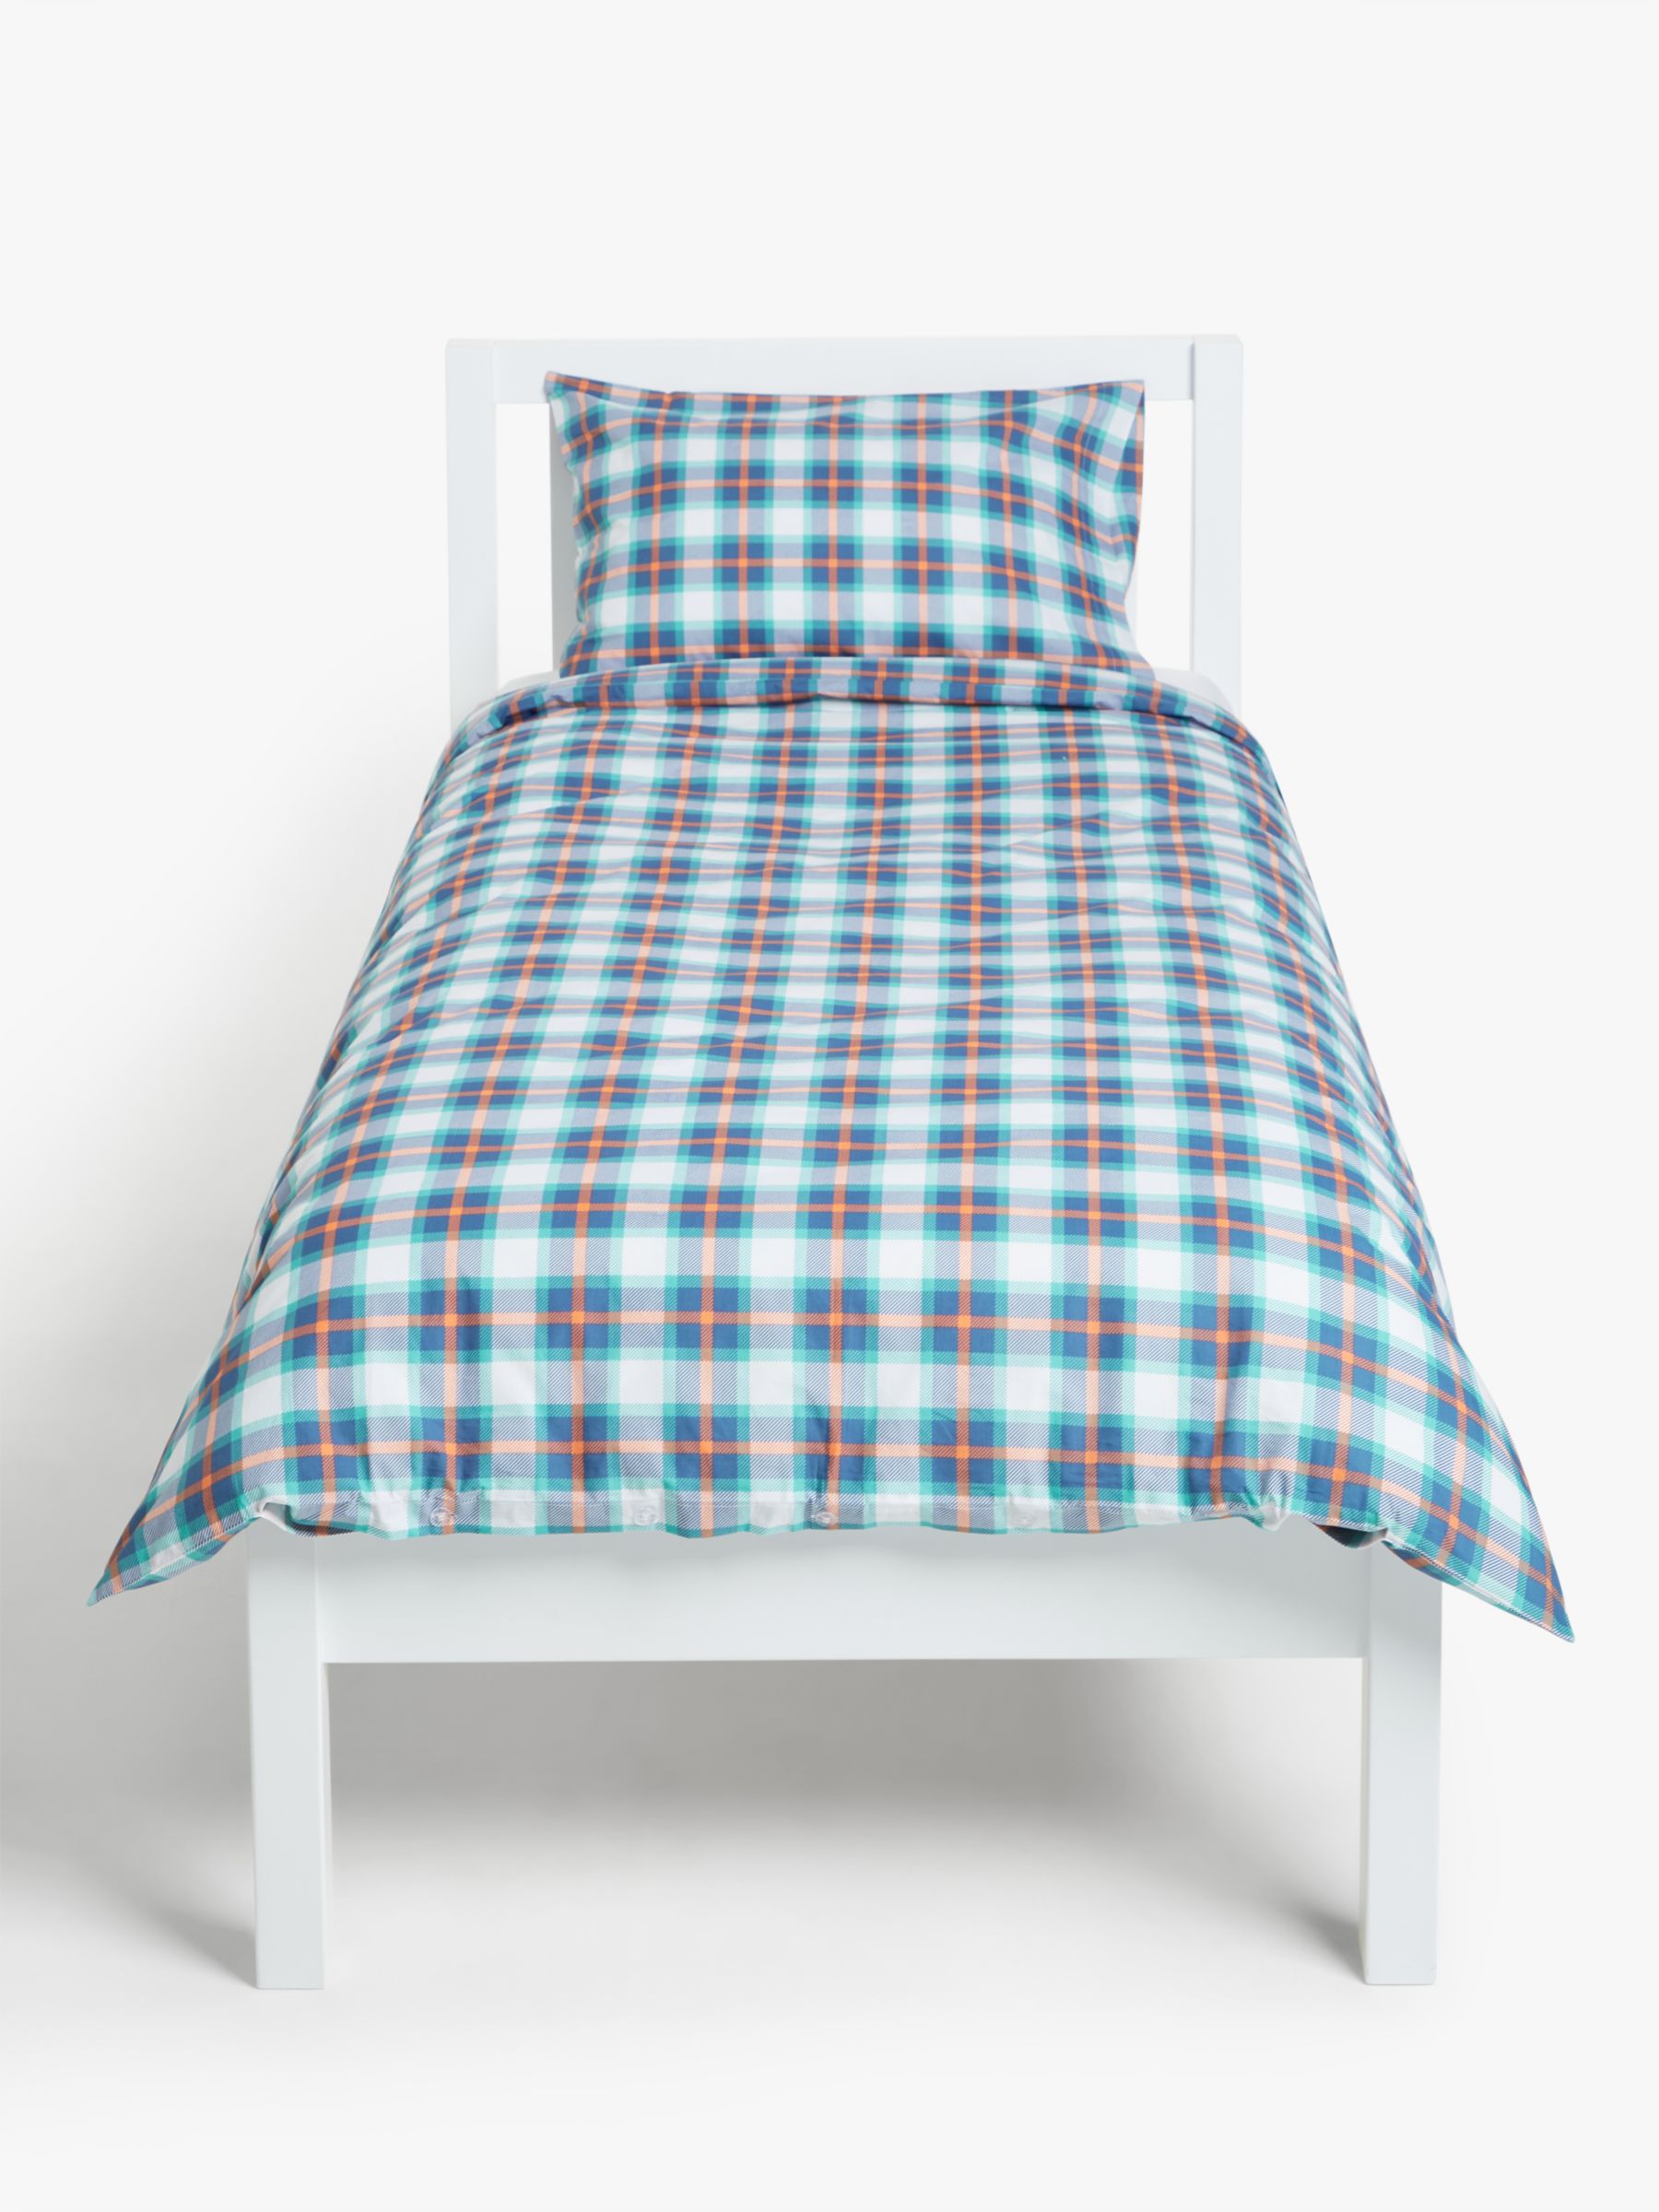 Little Home At John Lewis Check Duvet Cover And Pillowcase Set